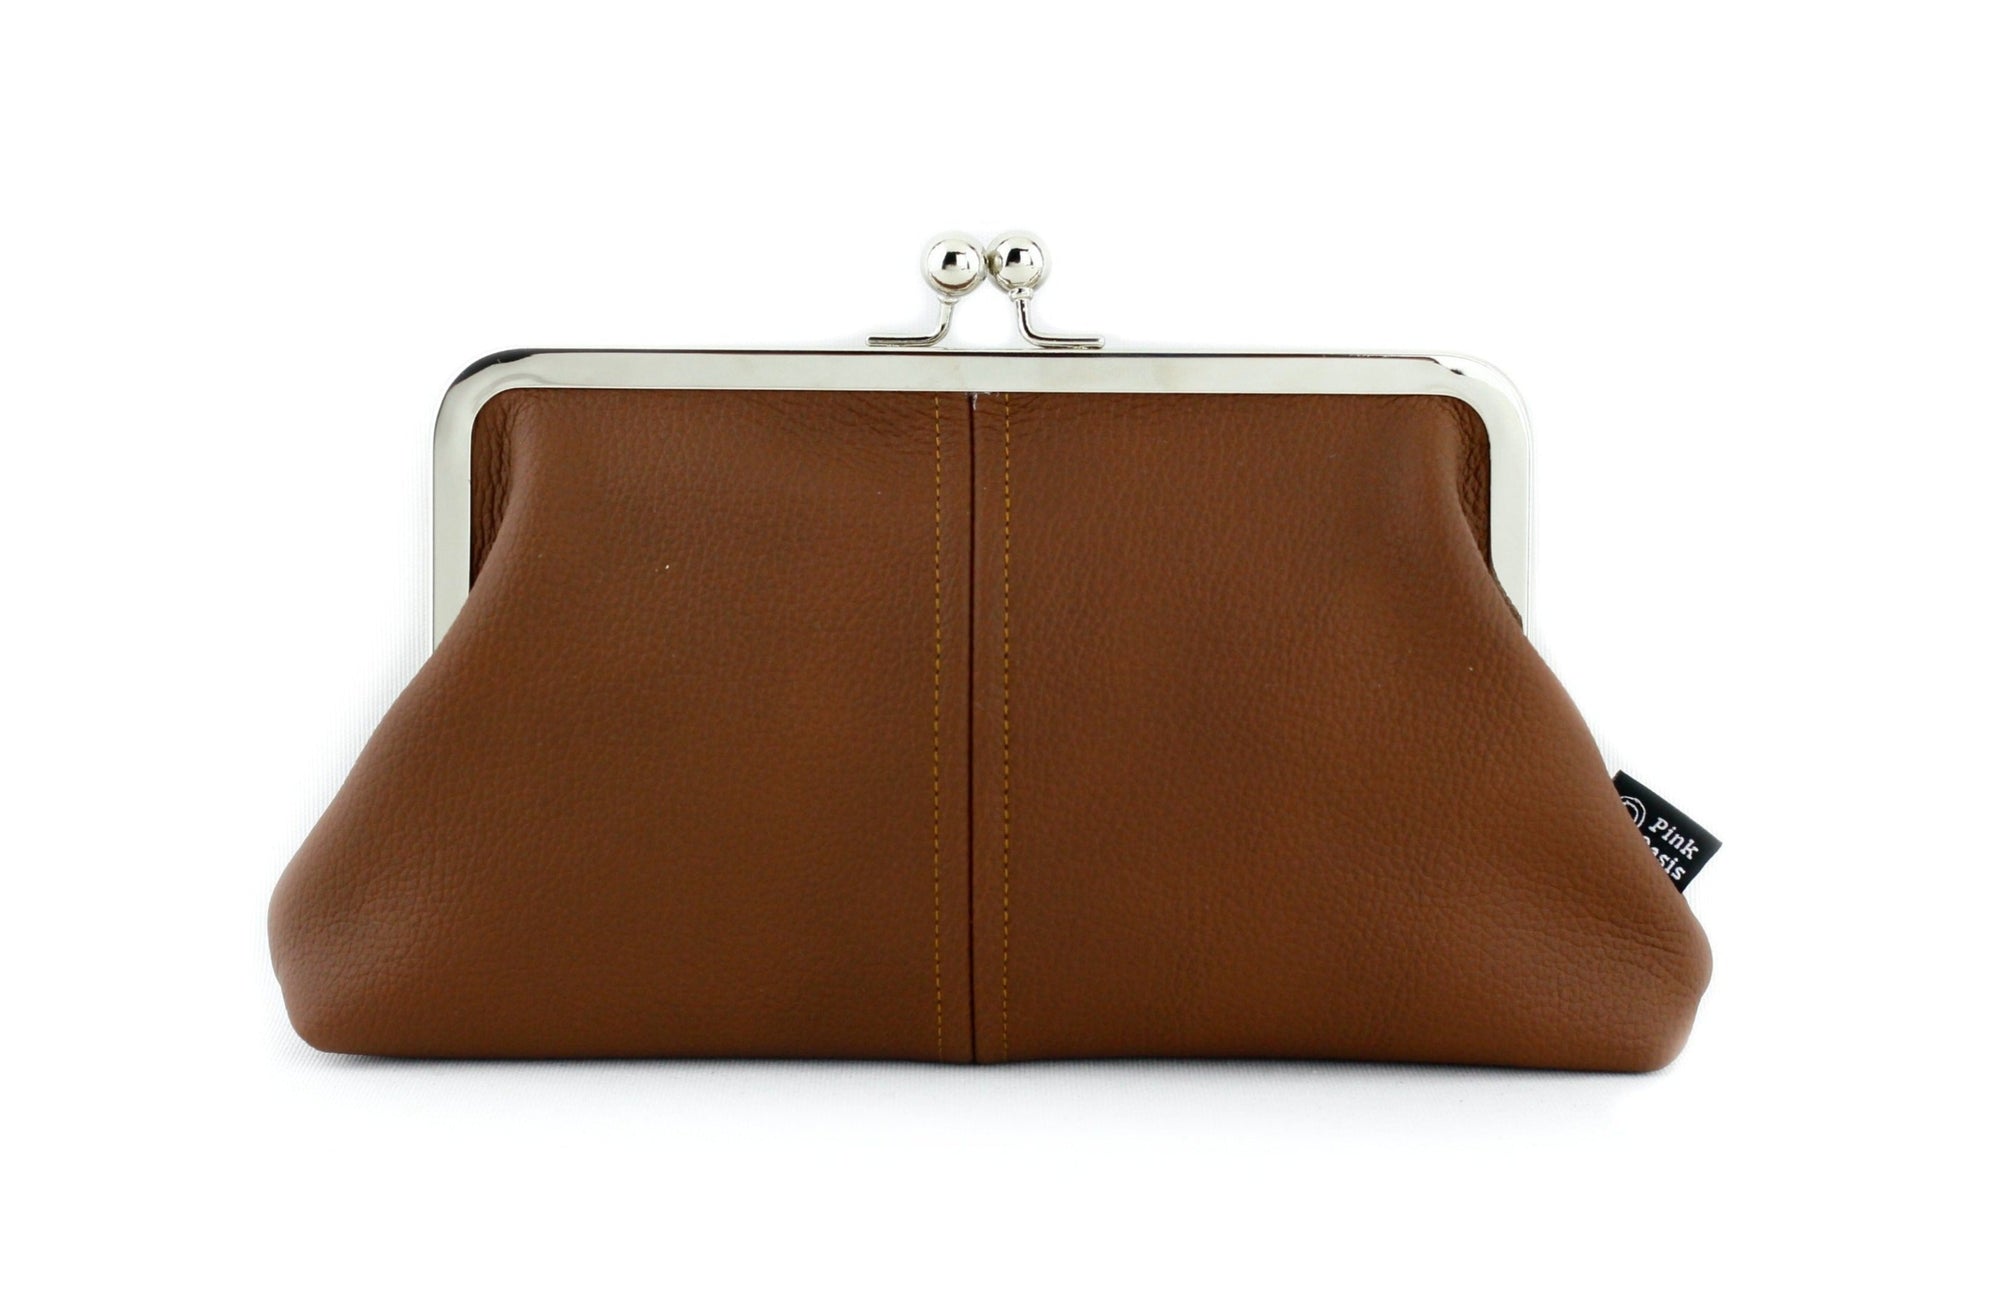 Brown Leather Kisslock Clutch  | PINKOASIS